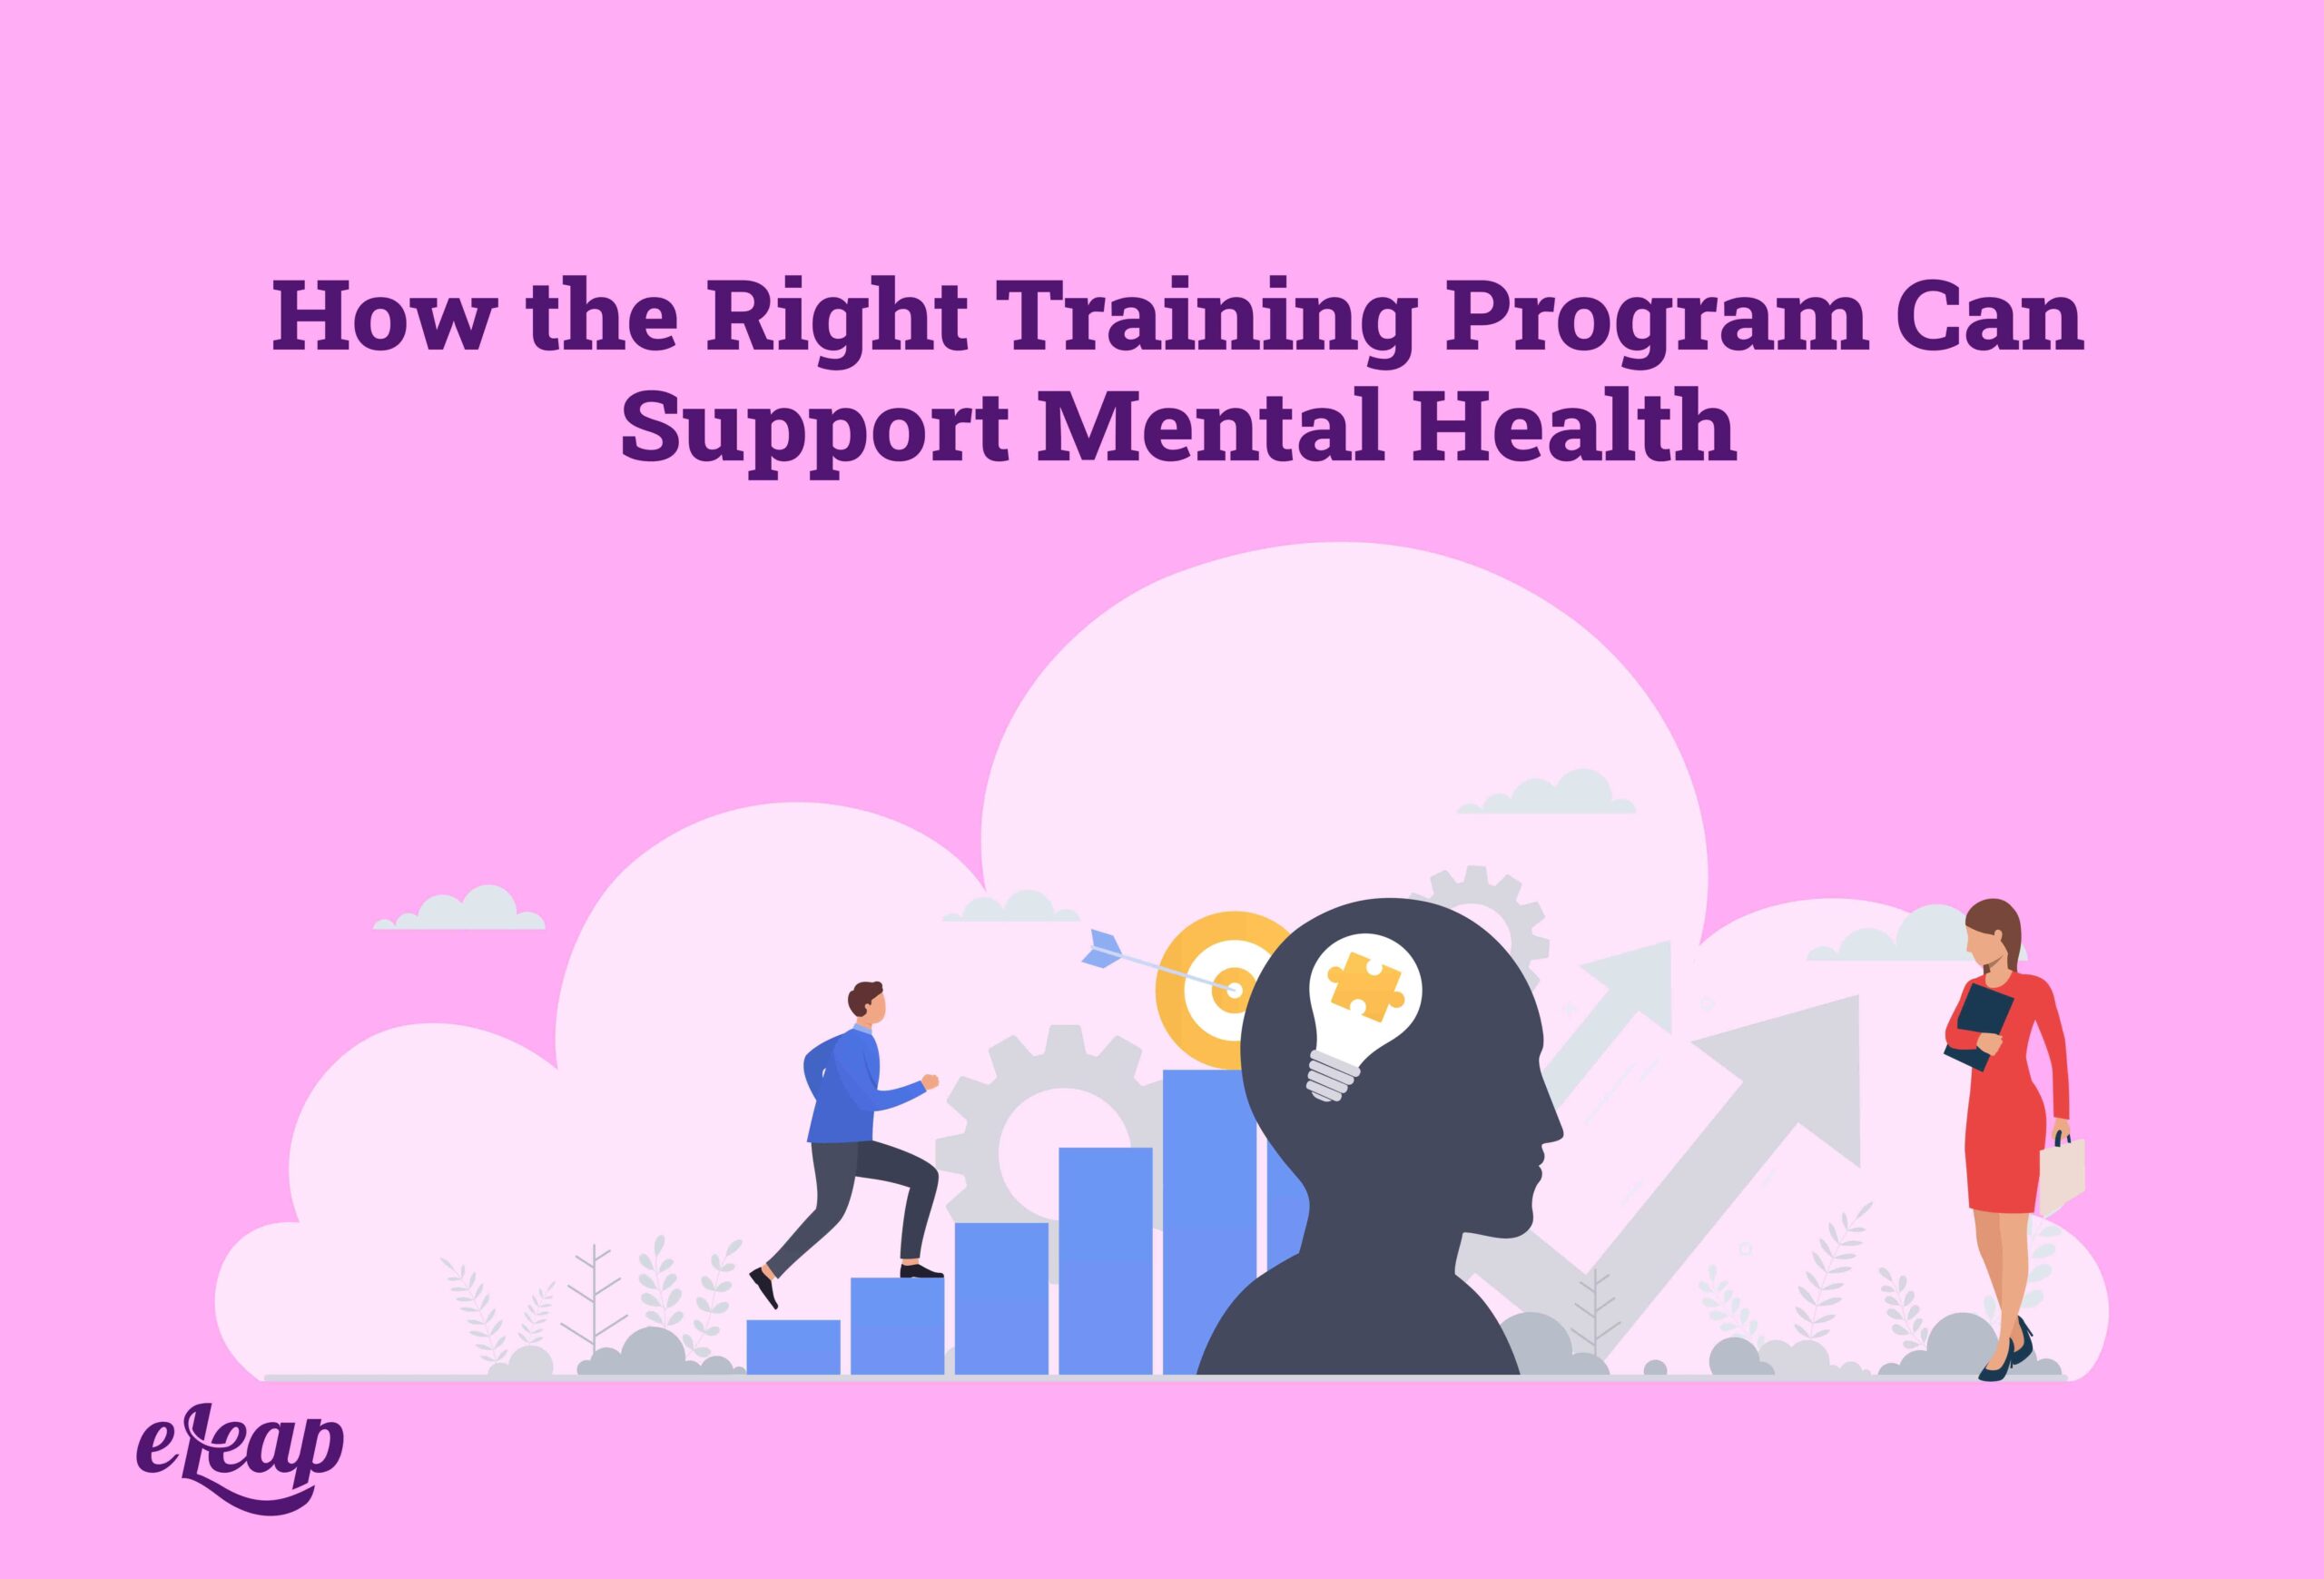 How the Right Training Program Can Support Mental Health